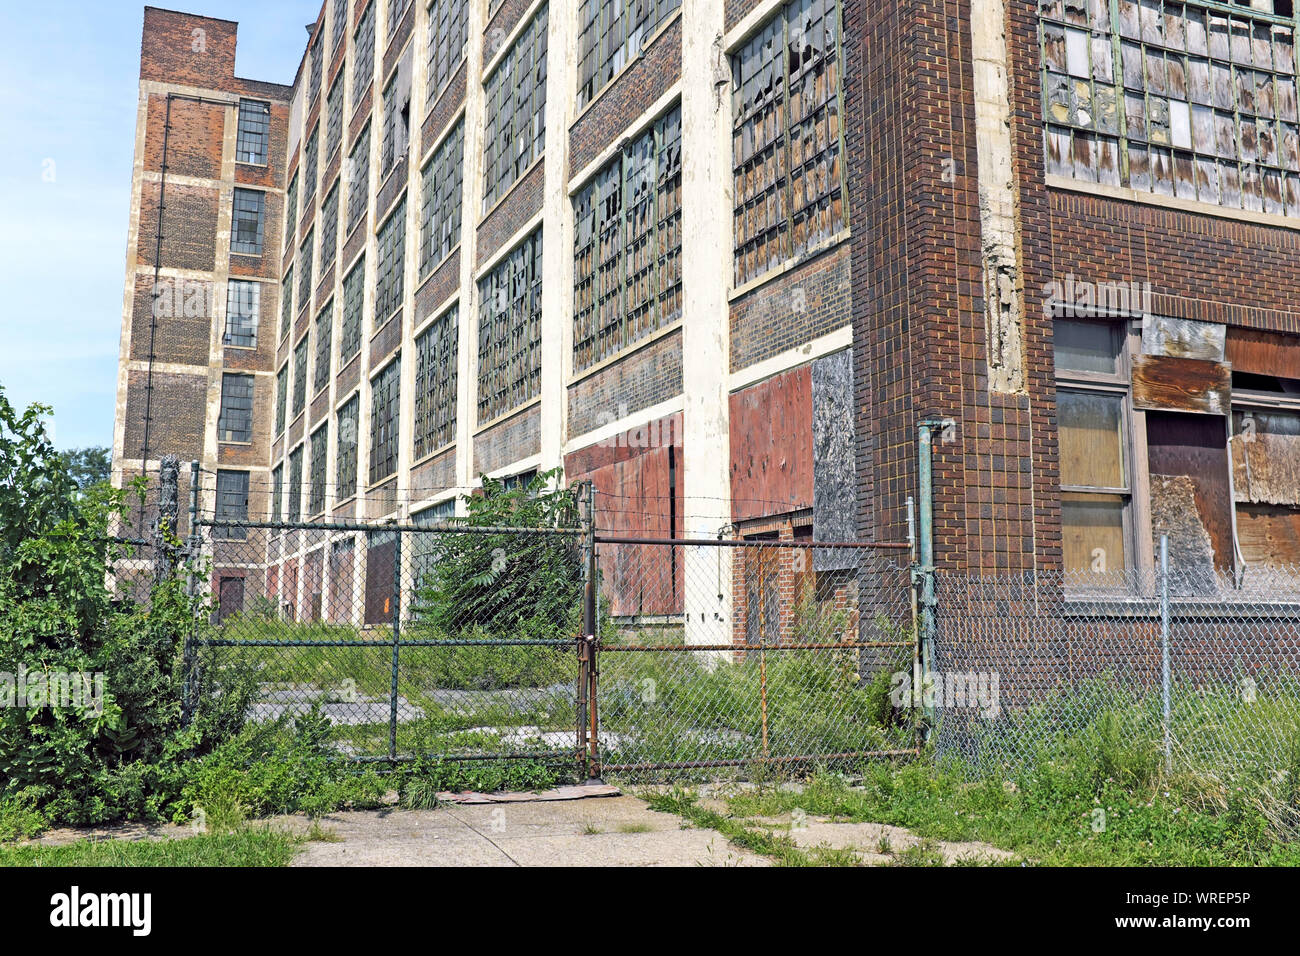 The Richman Brothers Factory on East 55th Street in Cleveland, Ohio, USA sits blighted and abandoned after stopping its manufacturing in 1990. Stock Photo